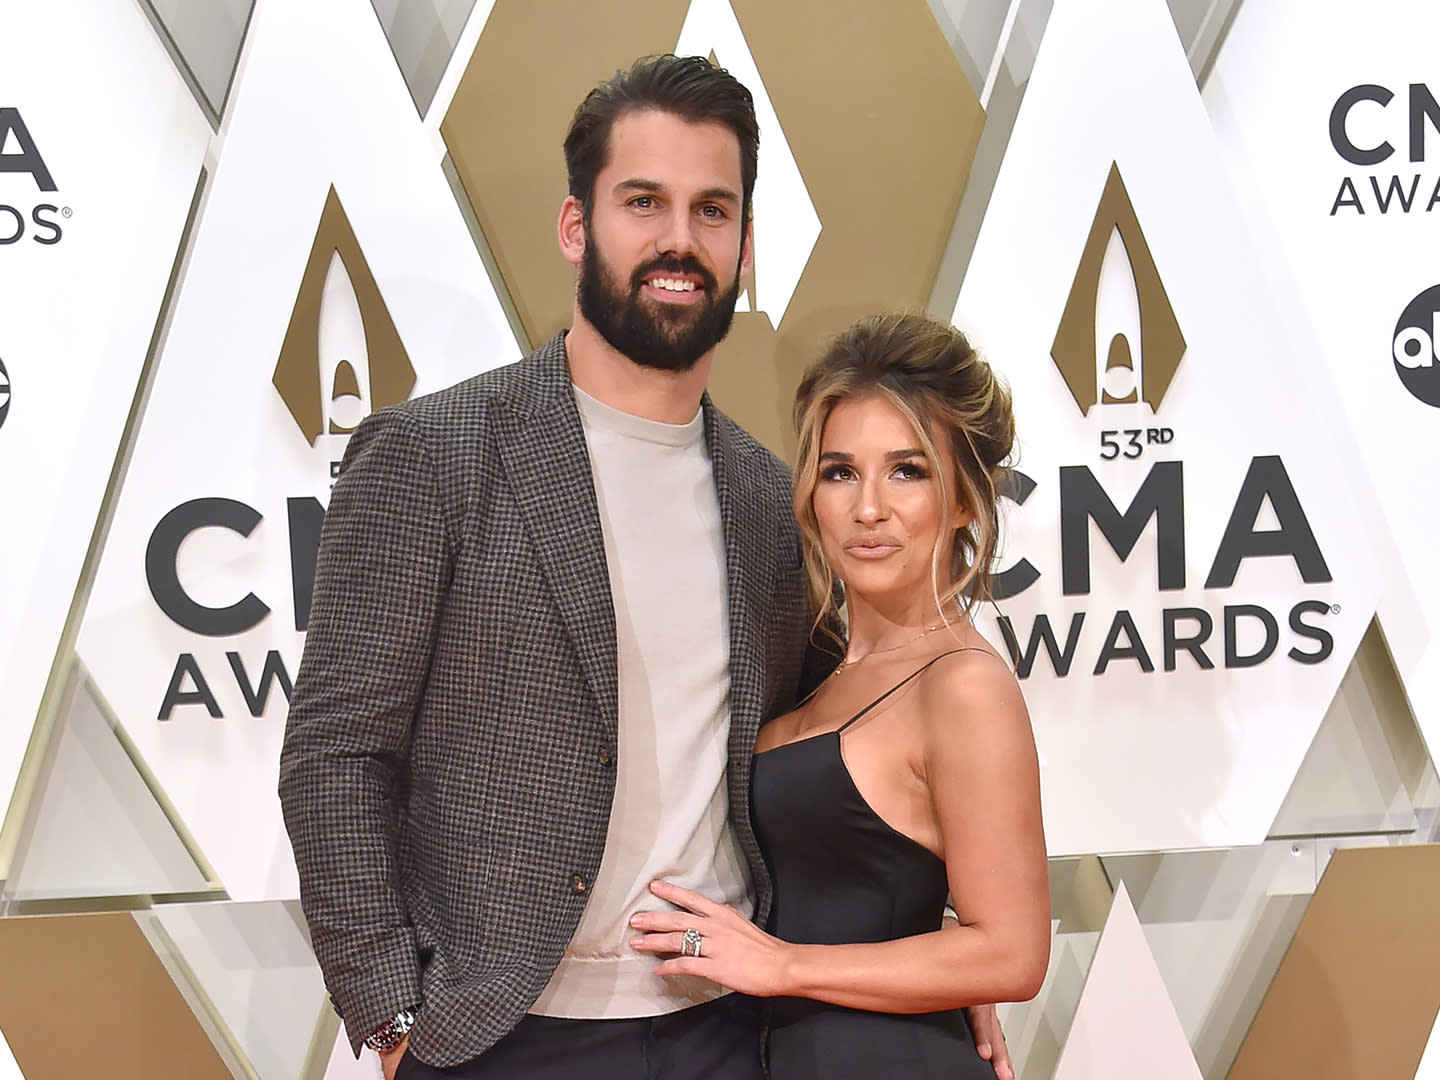 Jessie James Decker shares the photo of her son “struggling so hard to breathe”